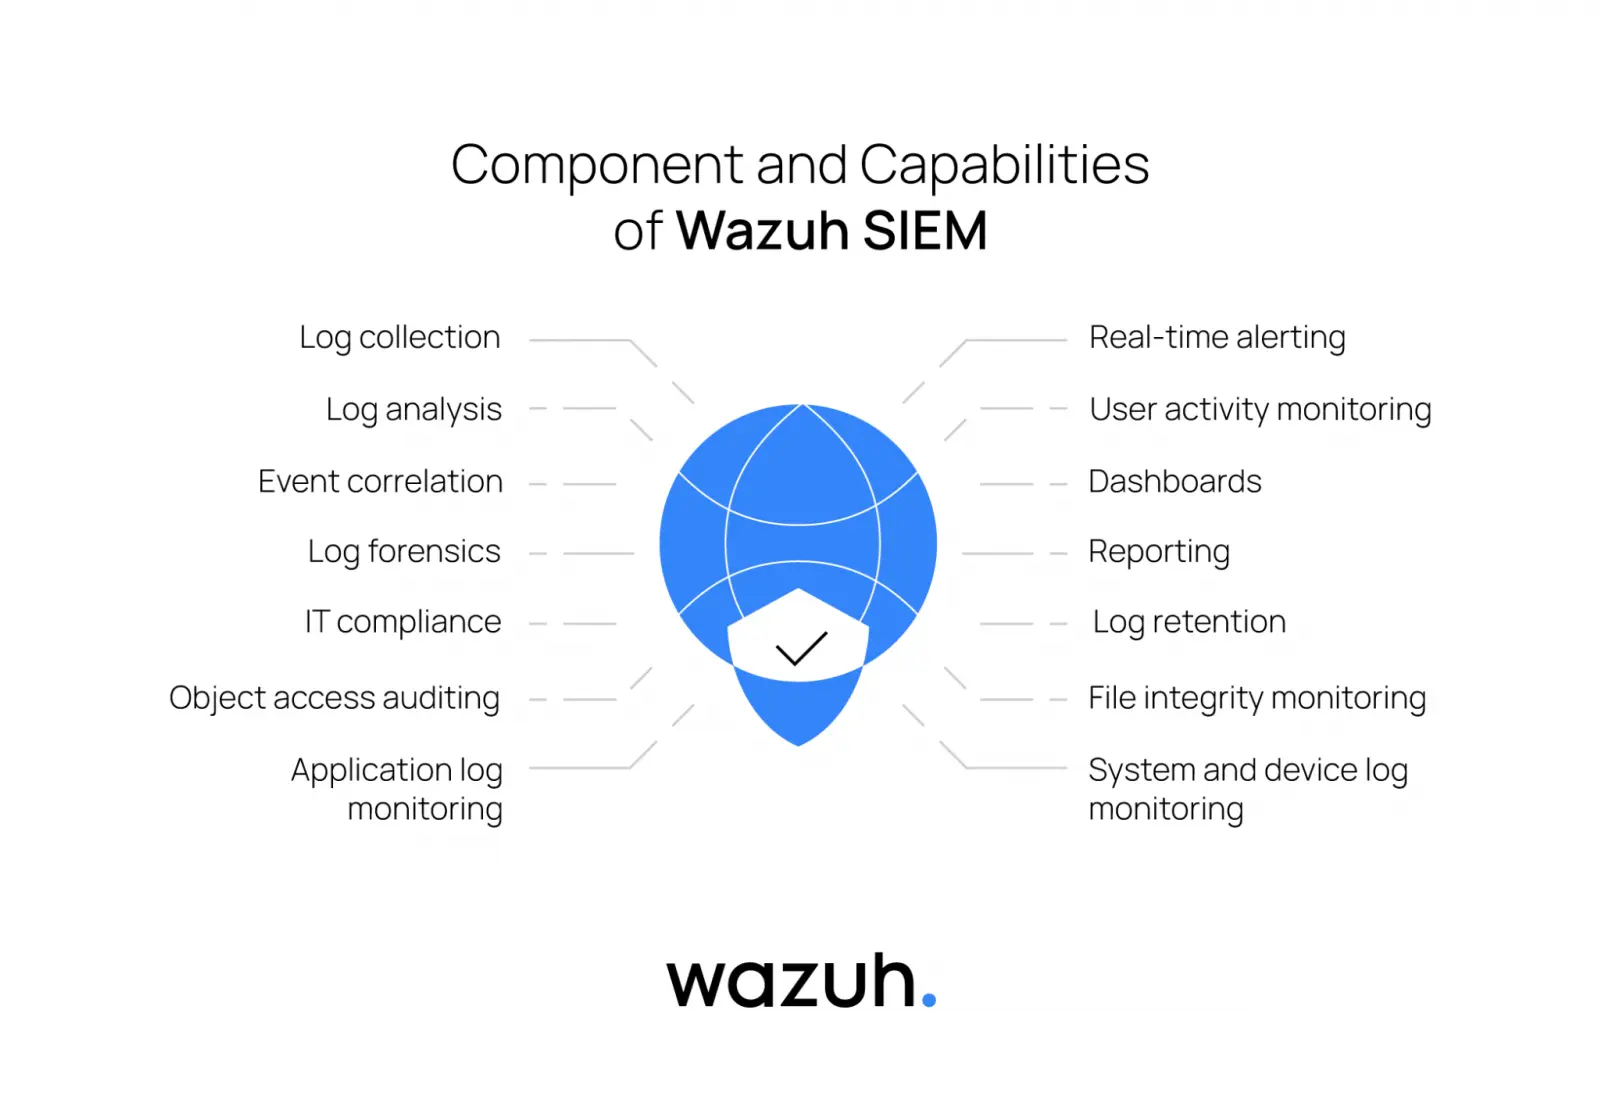 Components and capabilities of Wazuh